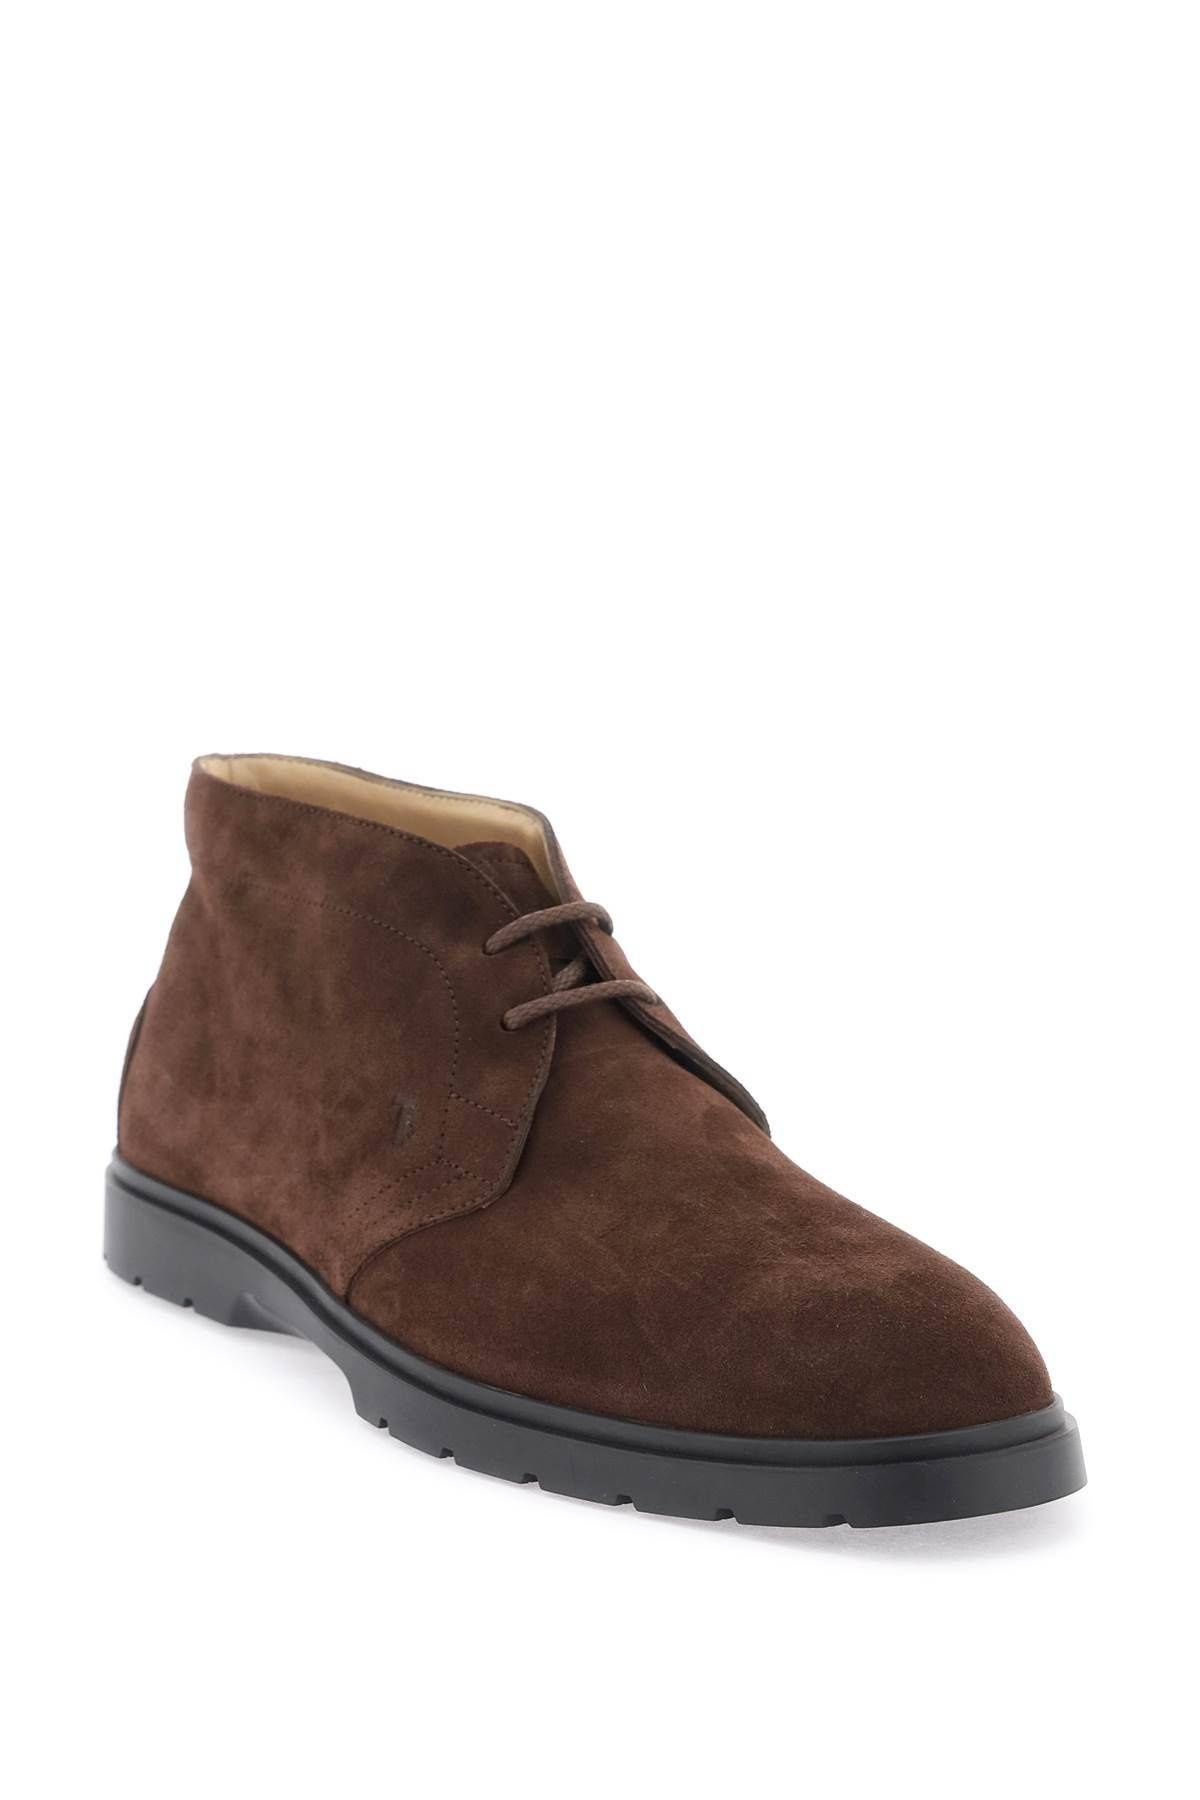 SUEDE LEATHER ANKLE BOOTS - 4